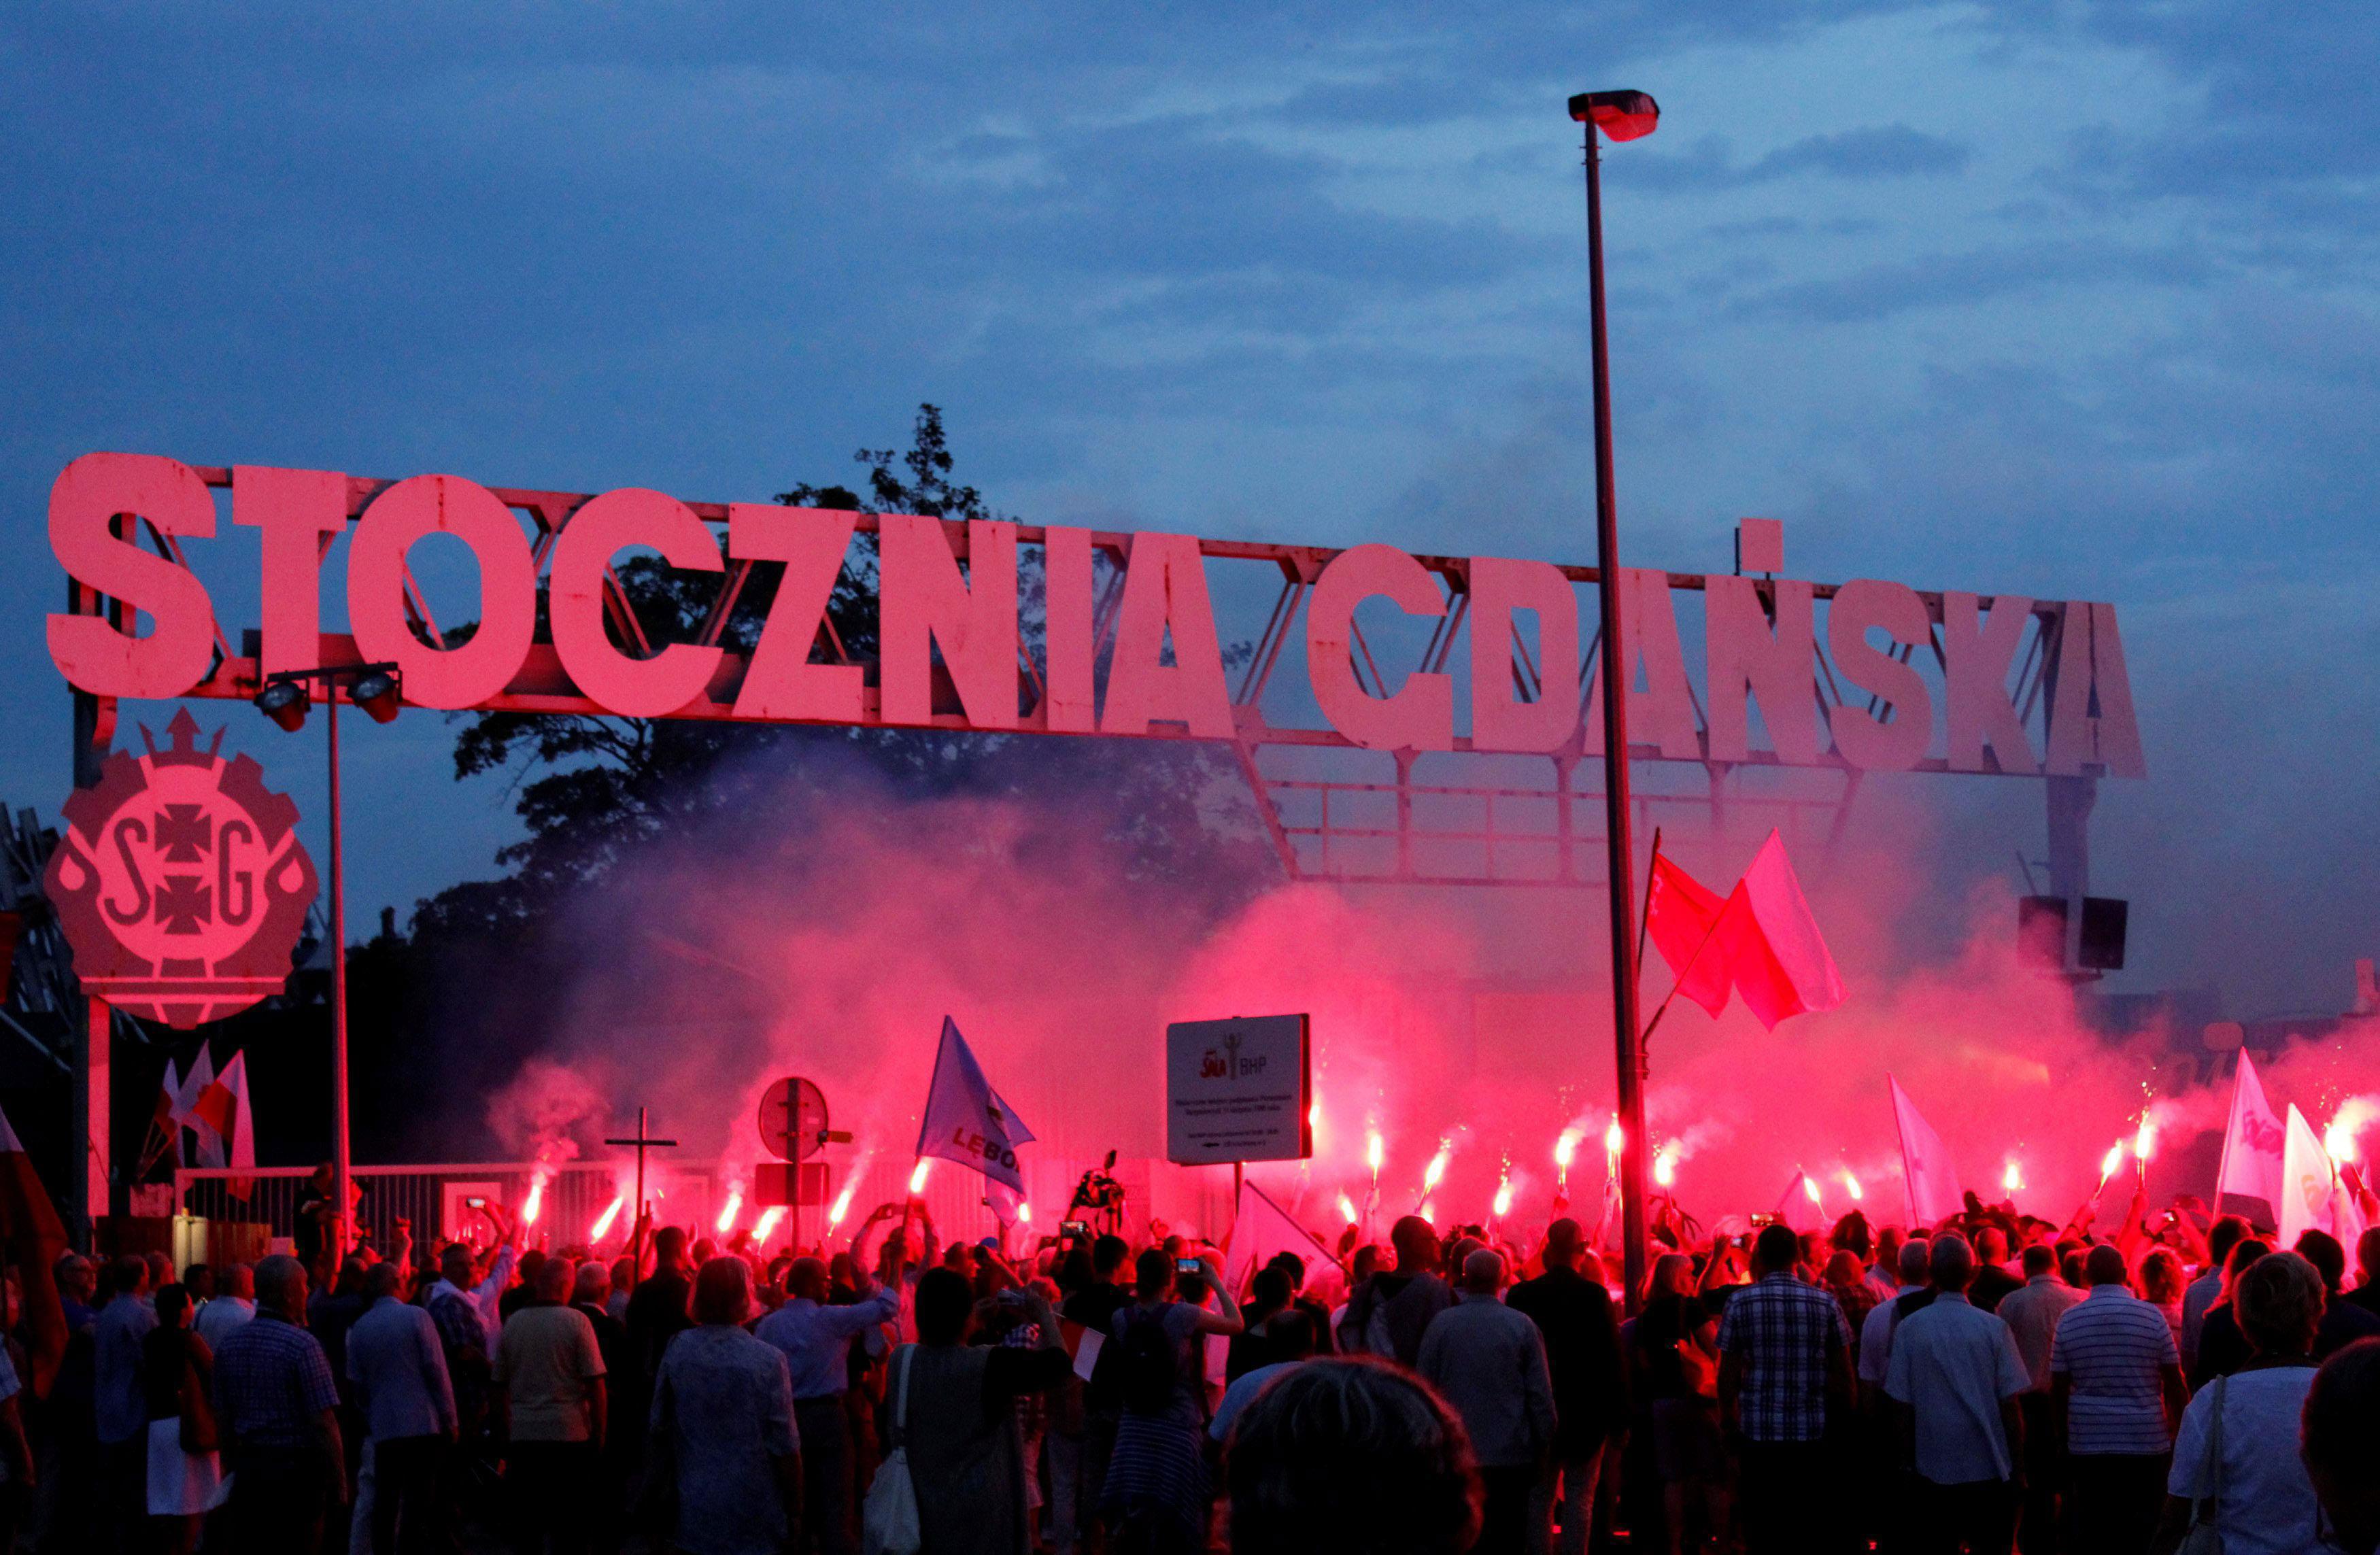 People light flares in front of the shipyard entrance during the 37th anniversary of emerging Solida